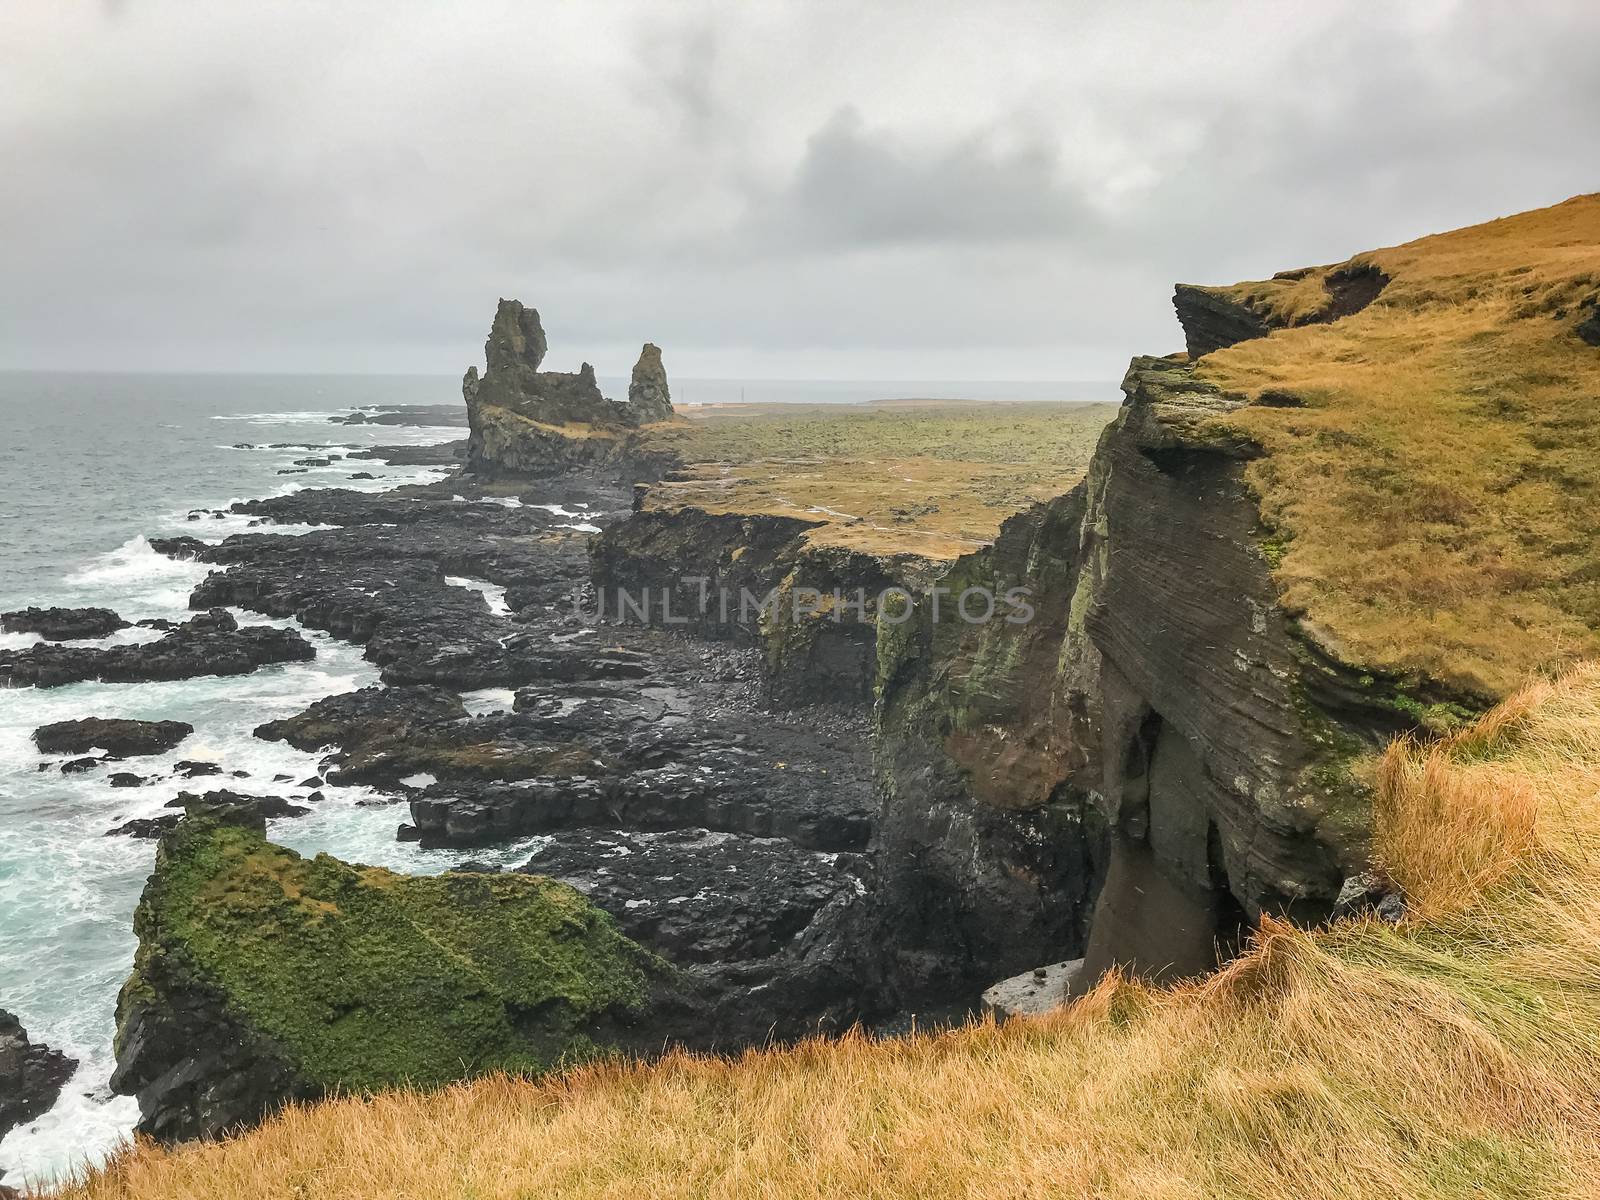 Snaefellsness national park in Iceland Londrangar volcanic basalt towers at steep cliff coast